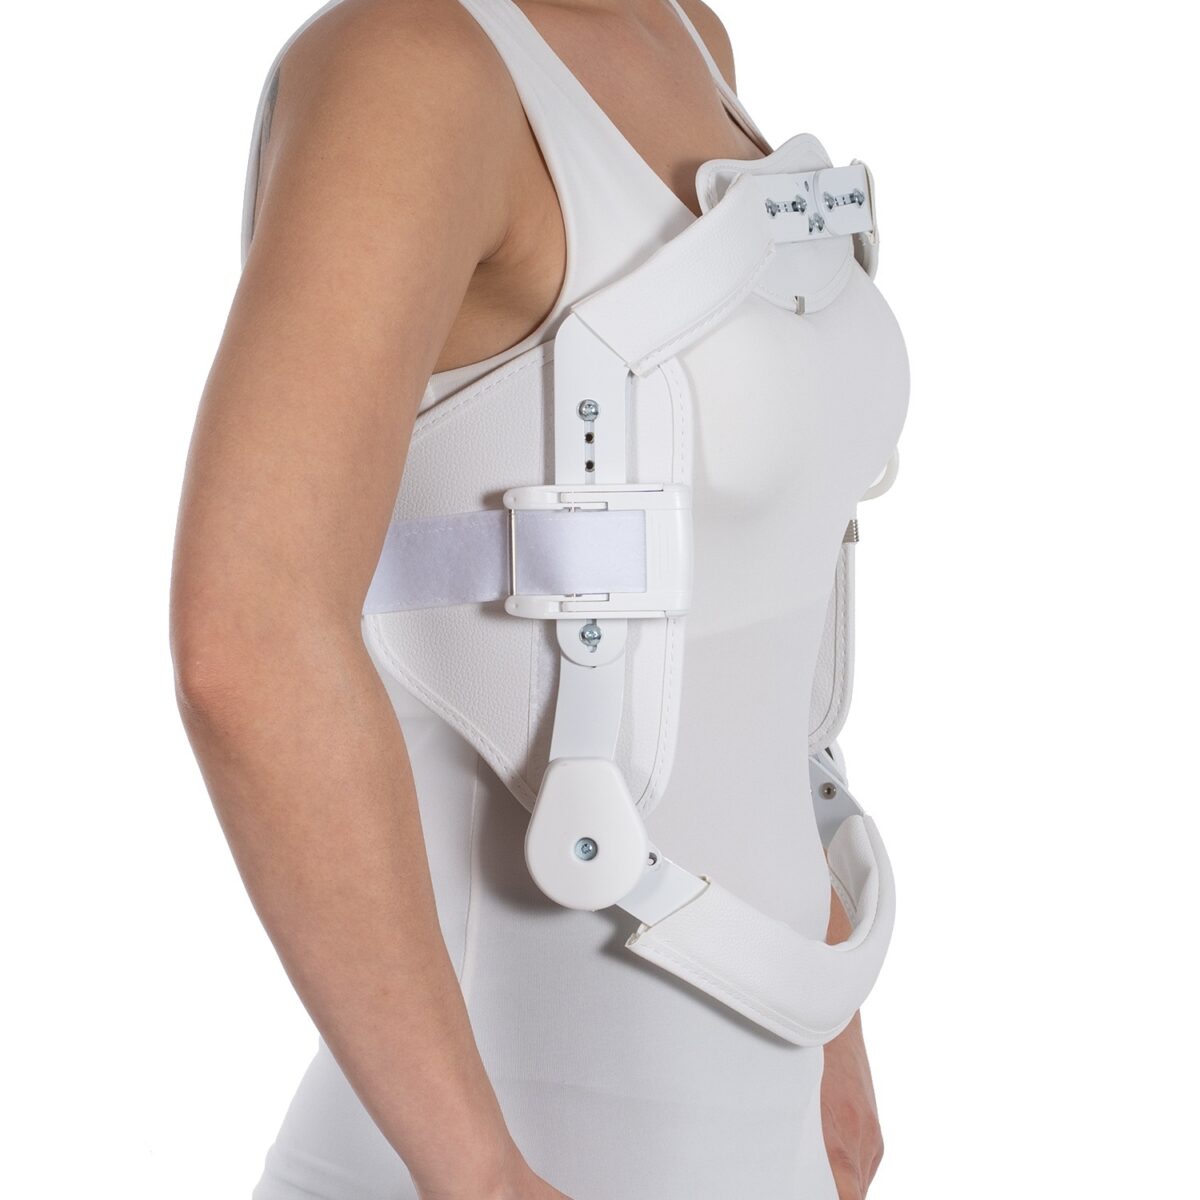 wingmed orthopedic equipments W431 dynamic hiperextension corset 60